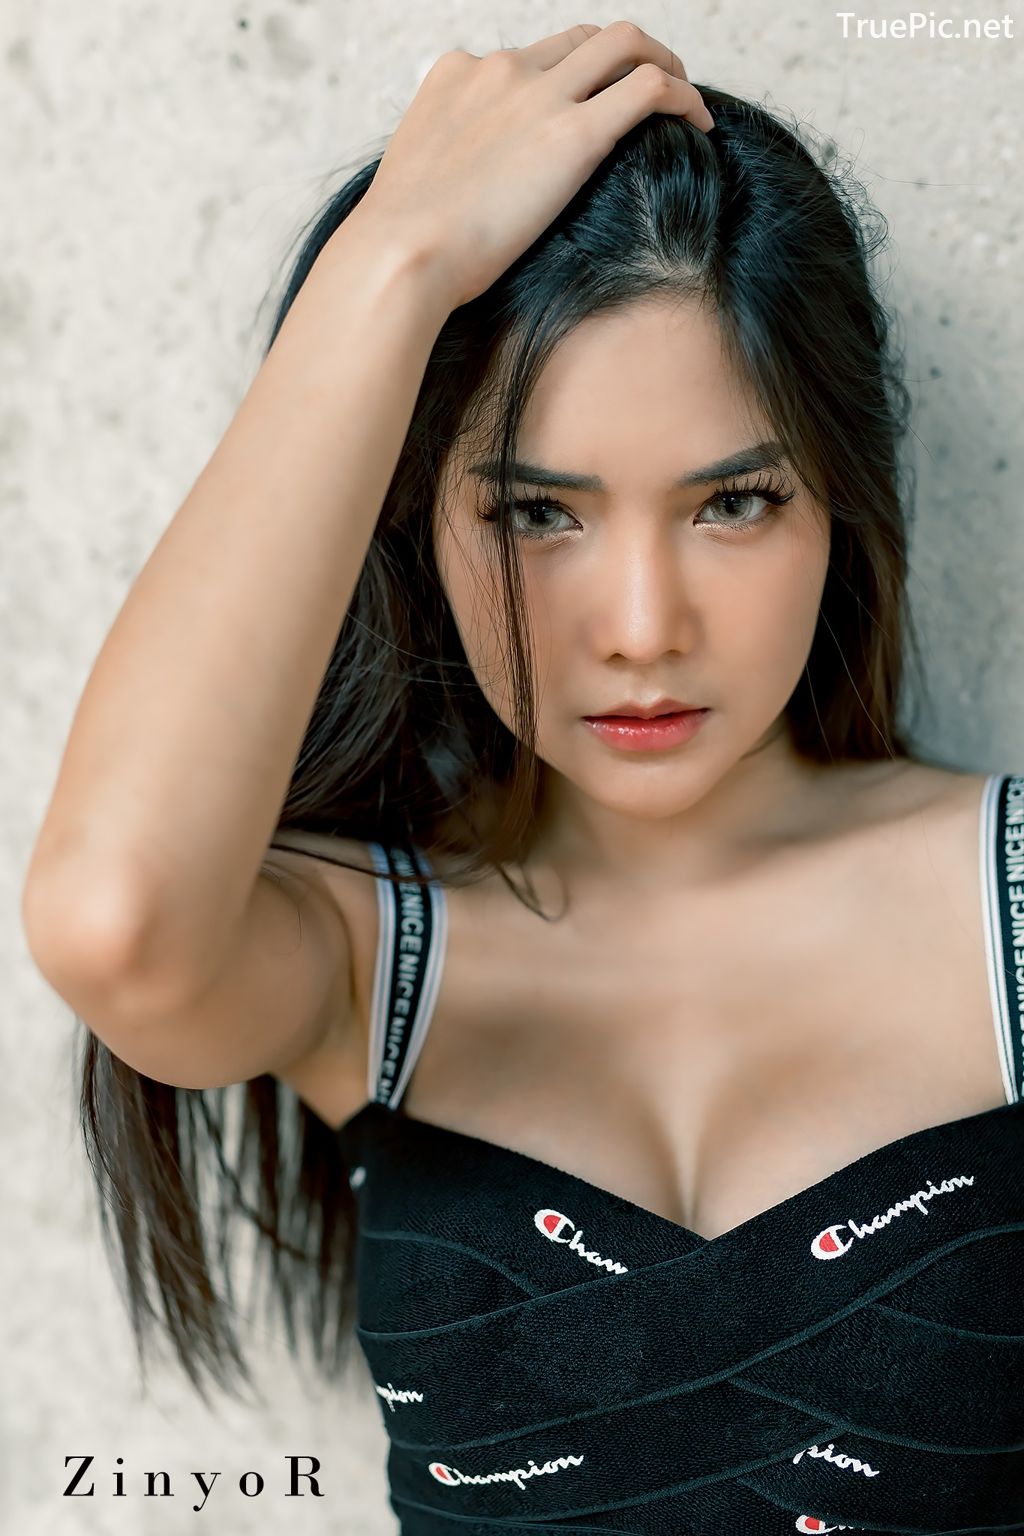 Image-Thailand-Model-Phitchamol-Srijantanet-Black-Crop-Top-and-Jean-TruePic.net- Picture-30